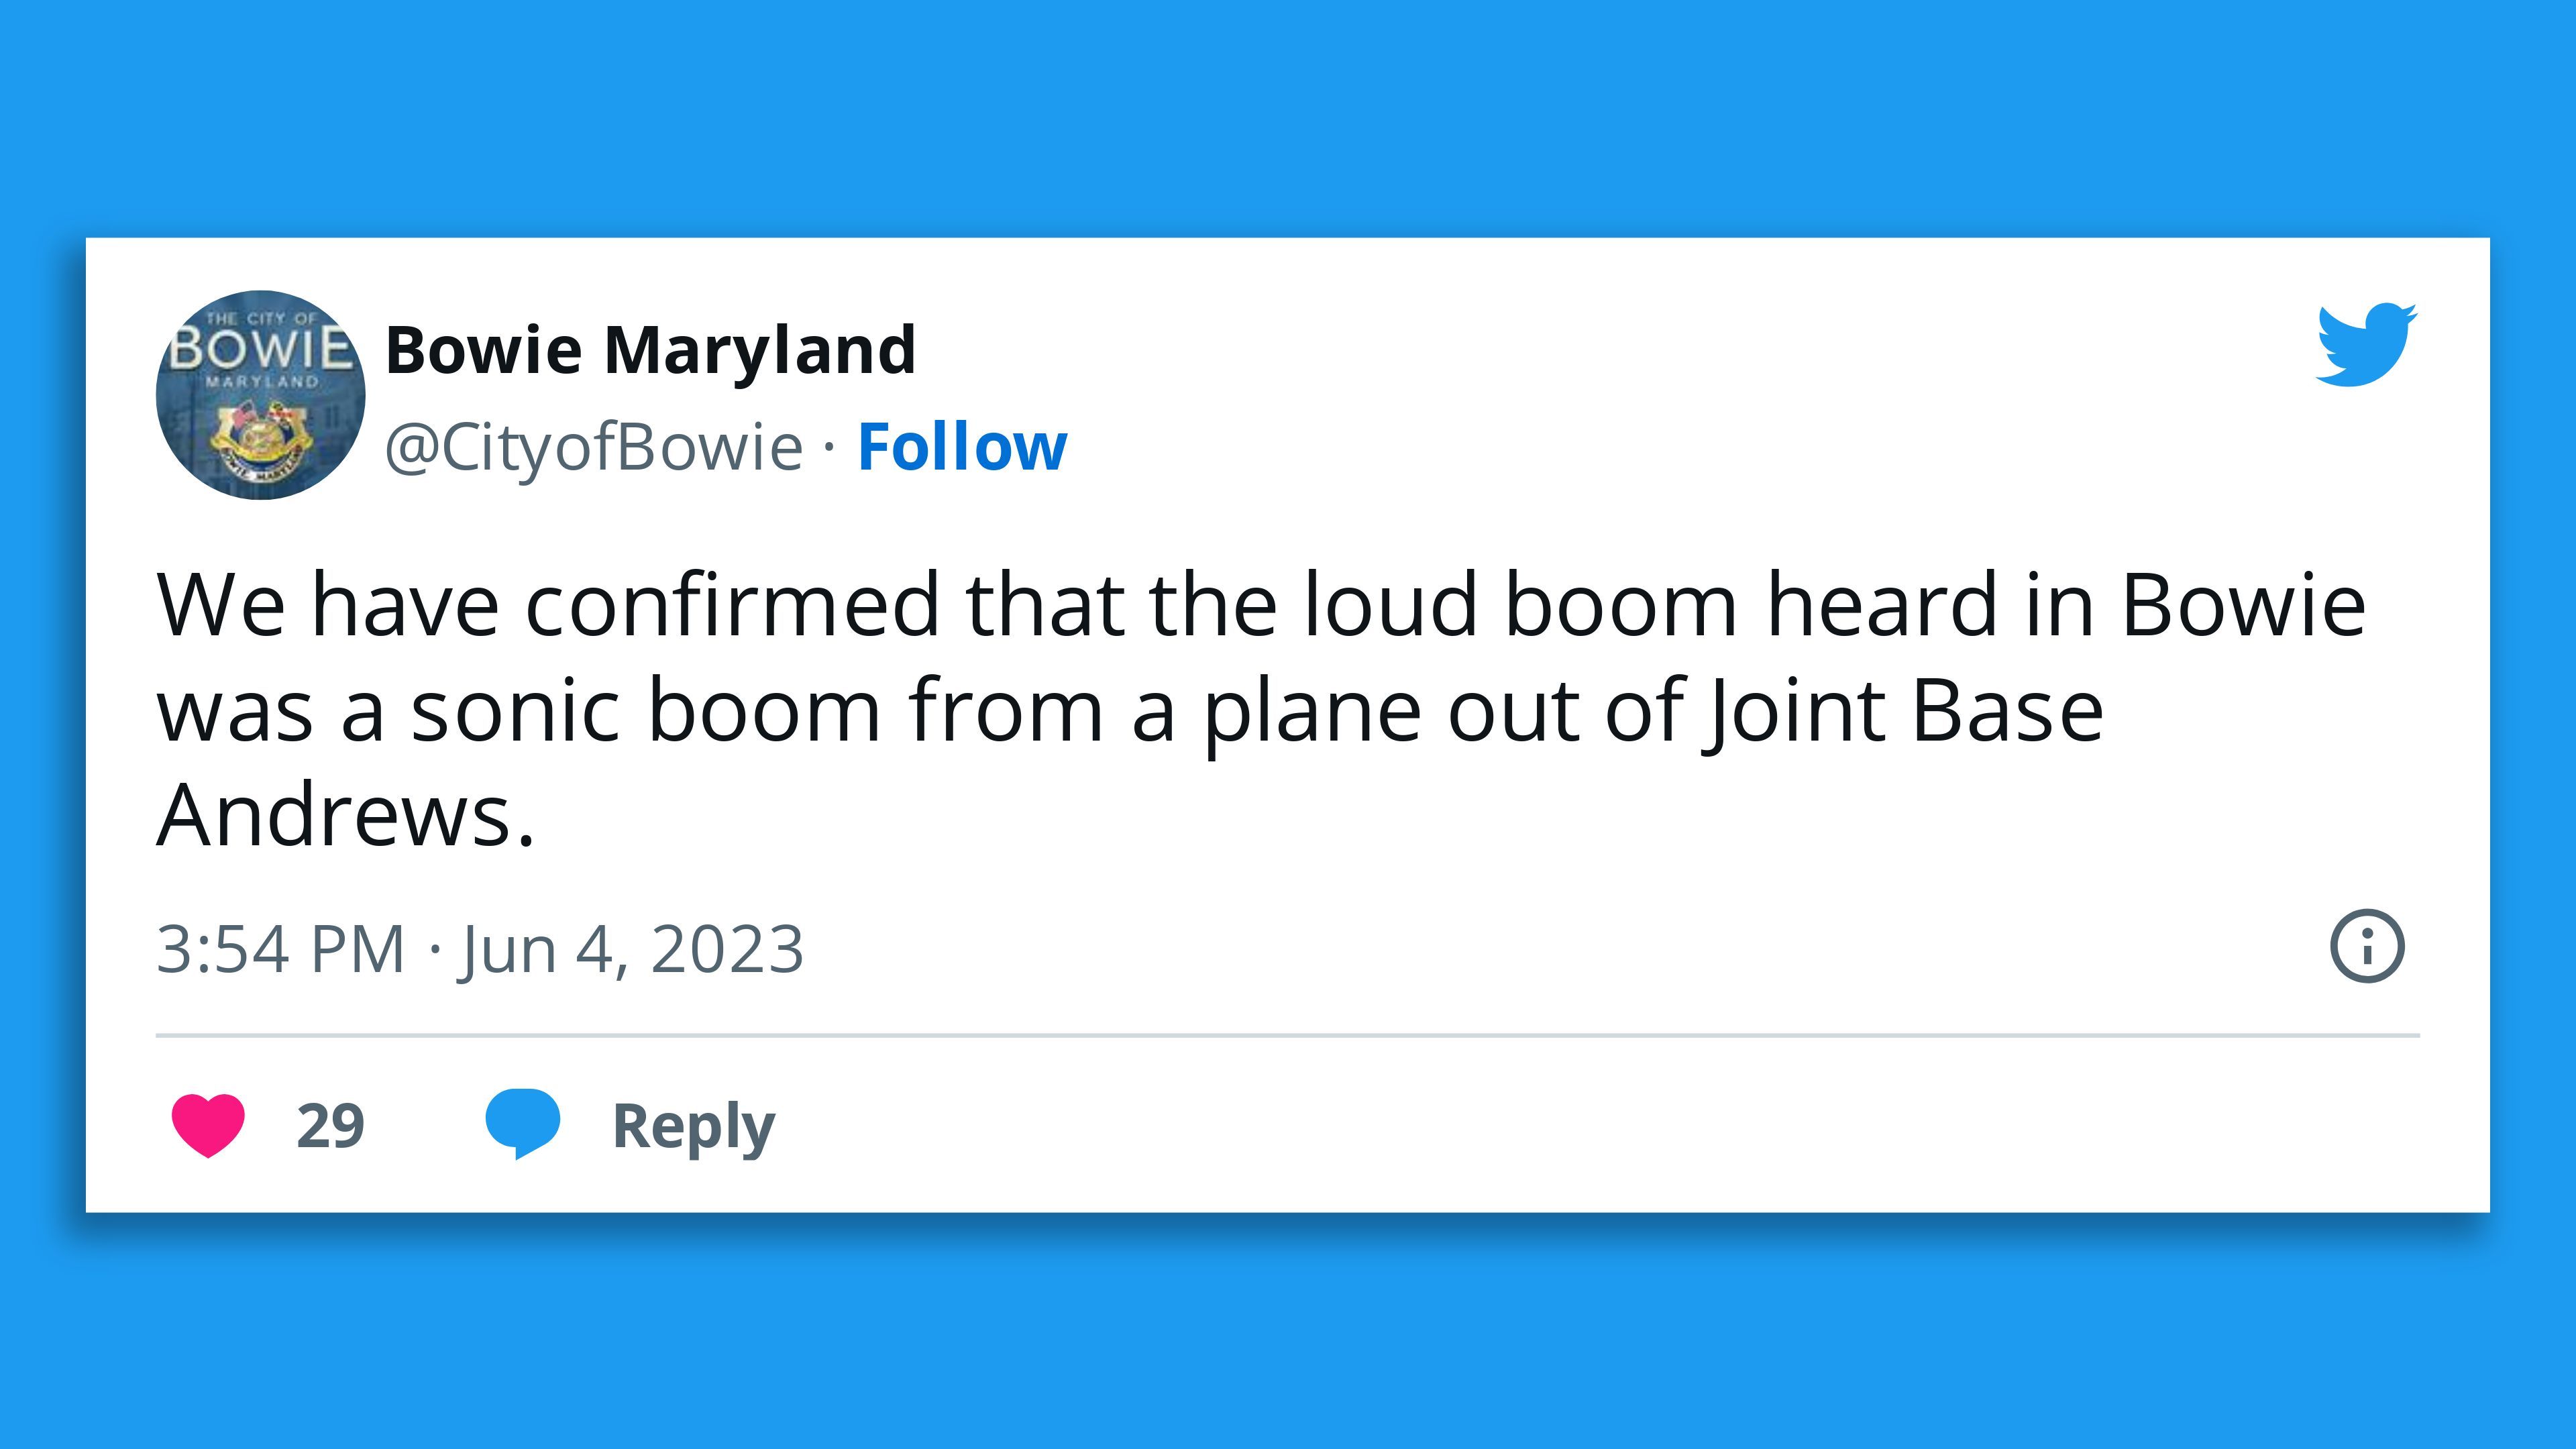 A screenshot of a tweet by the City of Bowie, Maryland, saying: "We have confirmed that the loud boom heard in Bowie was a sonic boom from a plane out of Joint Base Andrews."